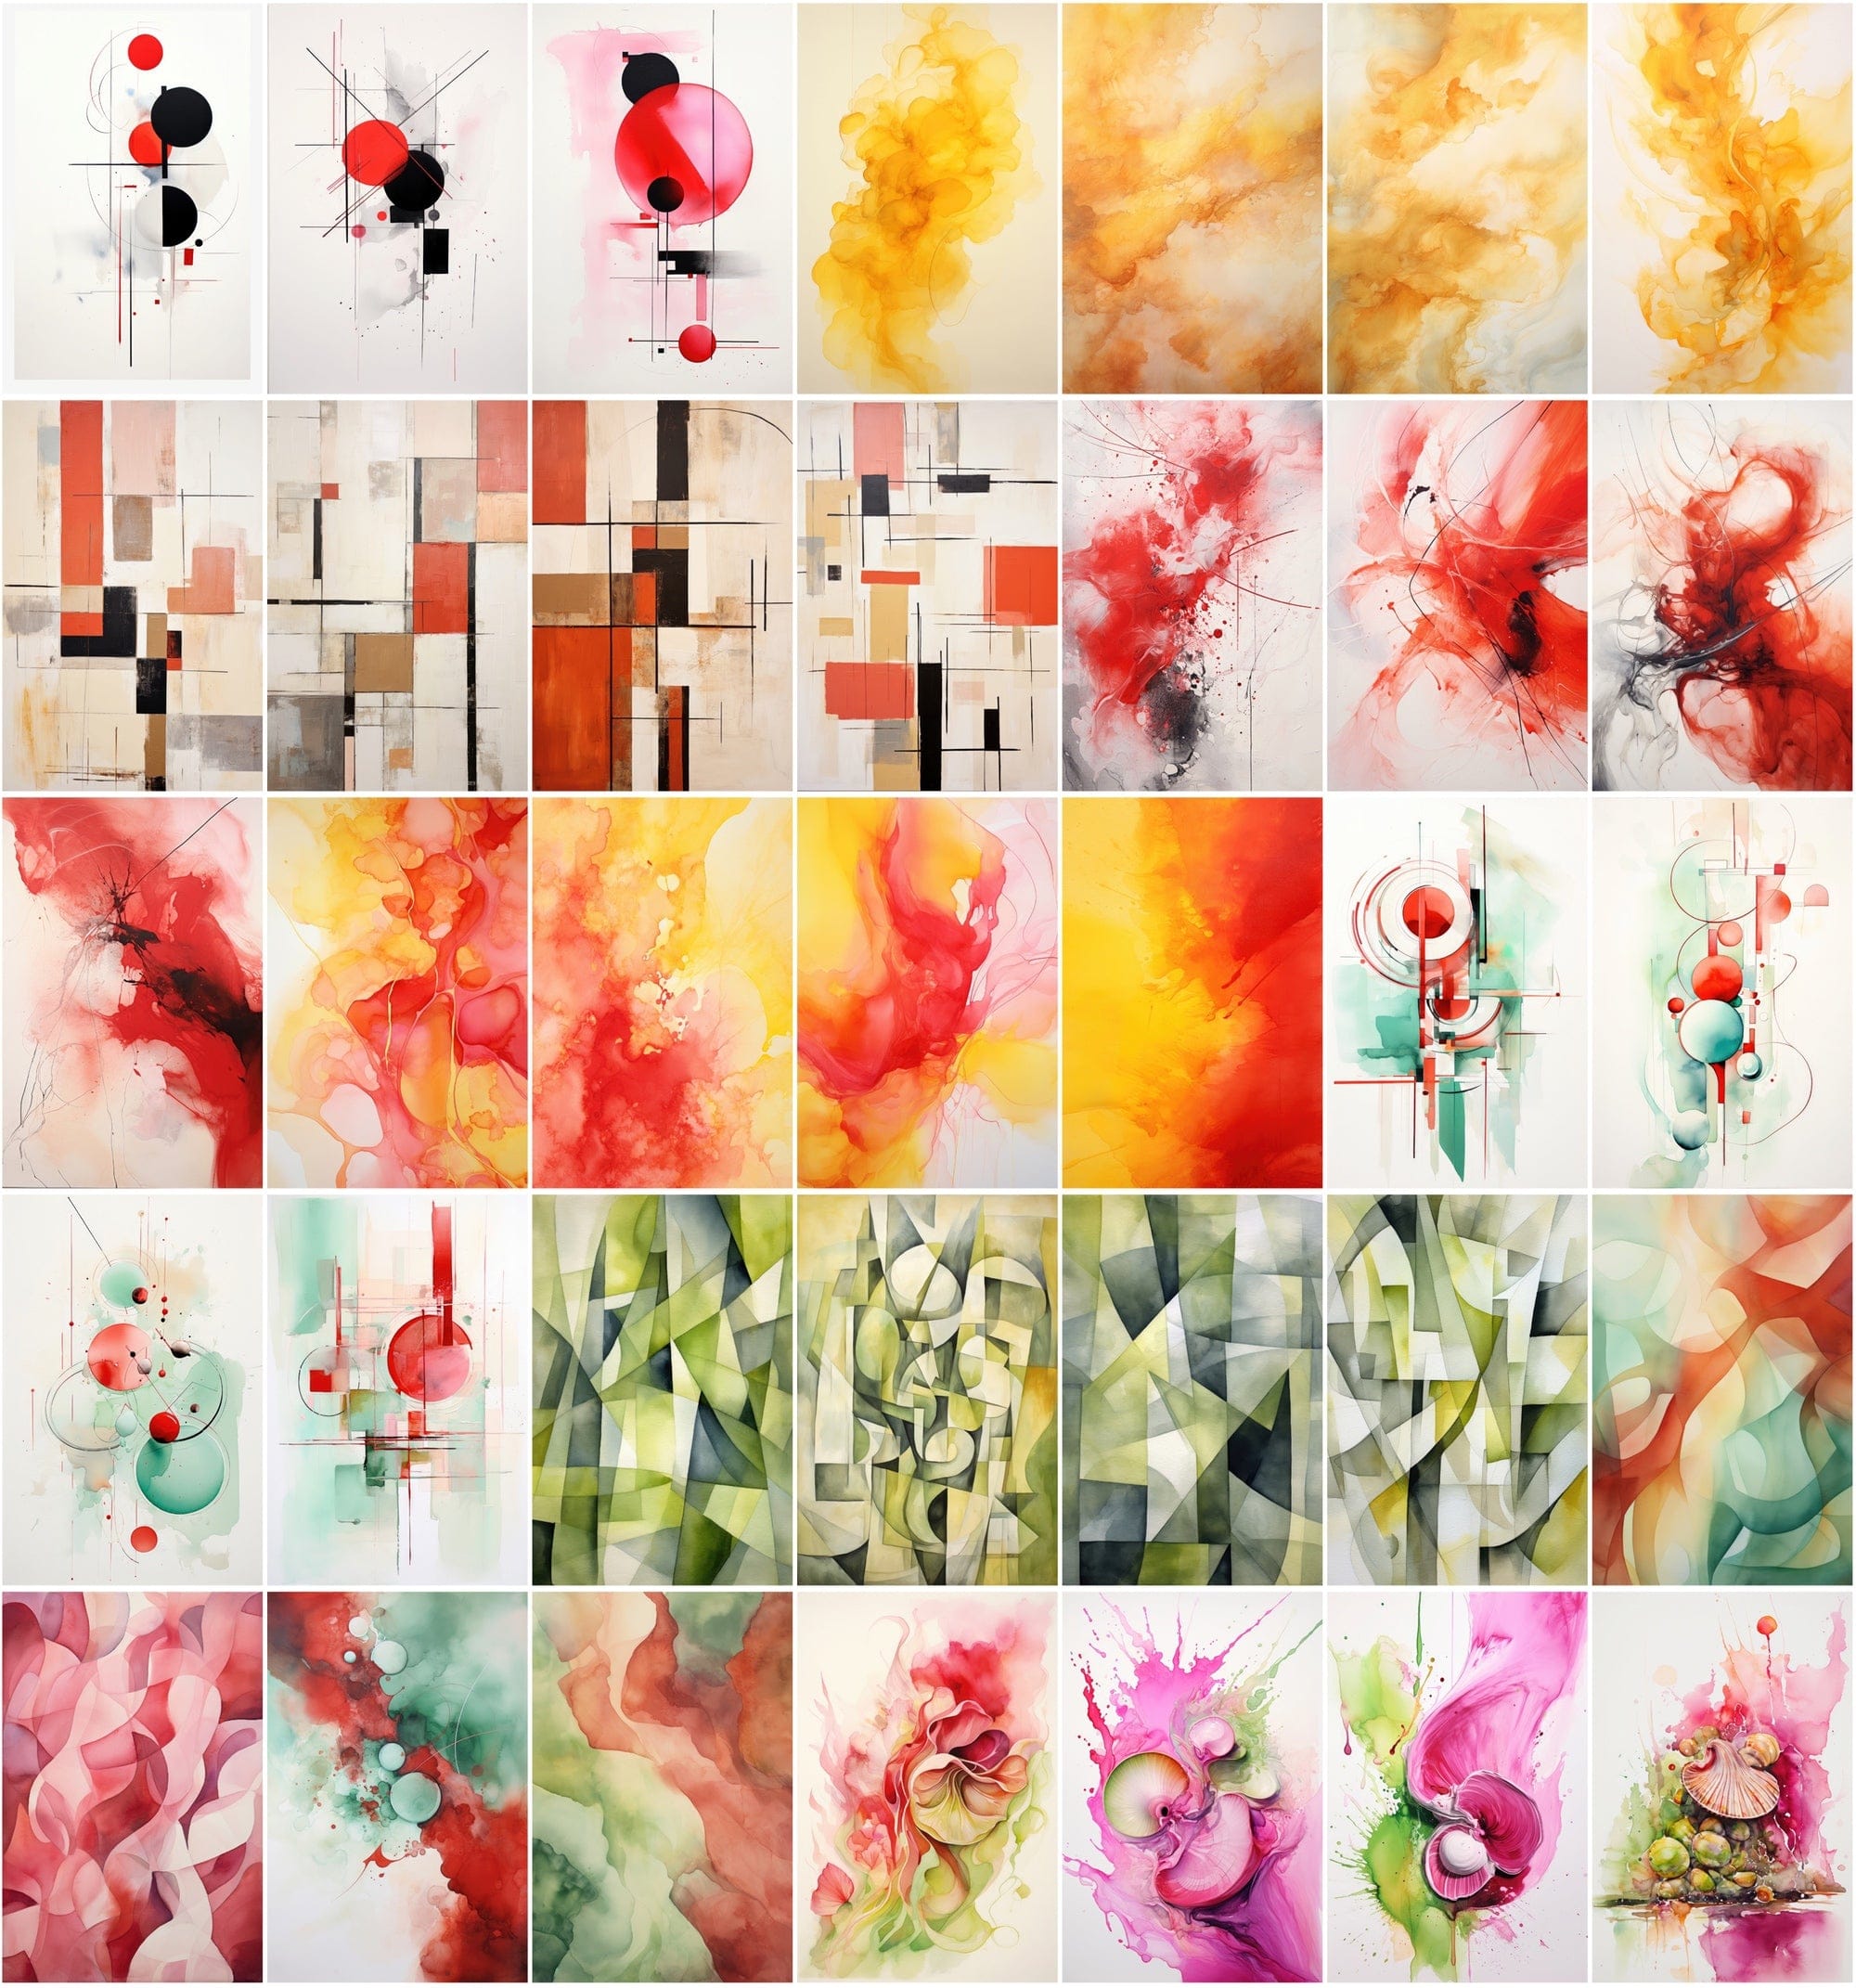 460 Premium Abstract Backgrounds: Action Painting, Geometric Designs, and Modernist Compositions - Commercial License Included Digital Download Sumobundle